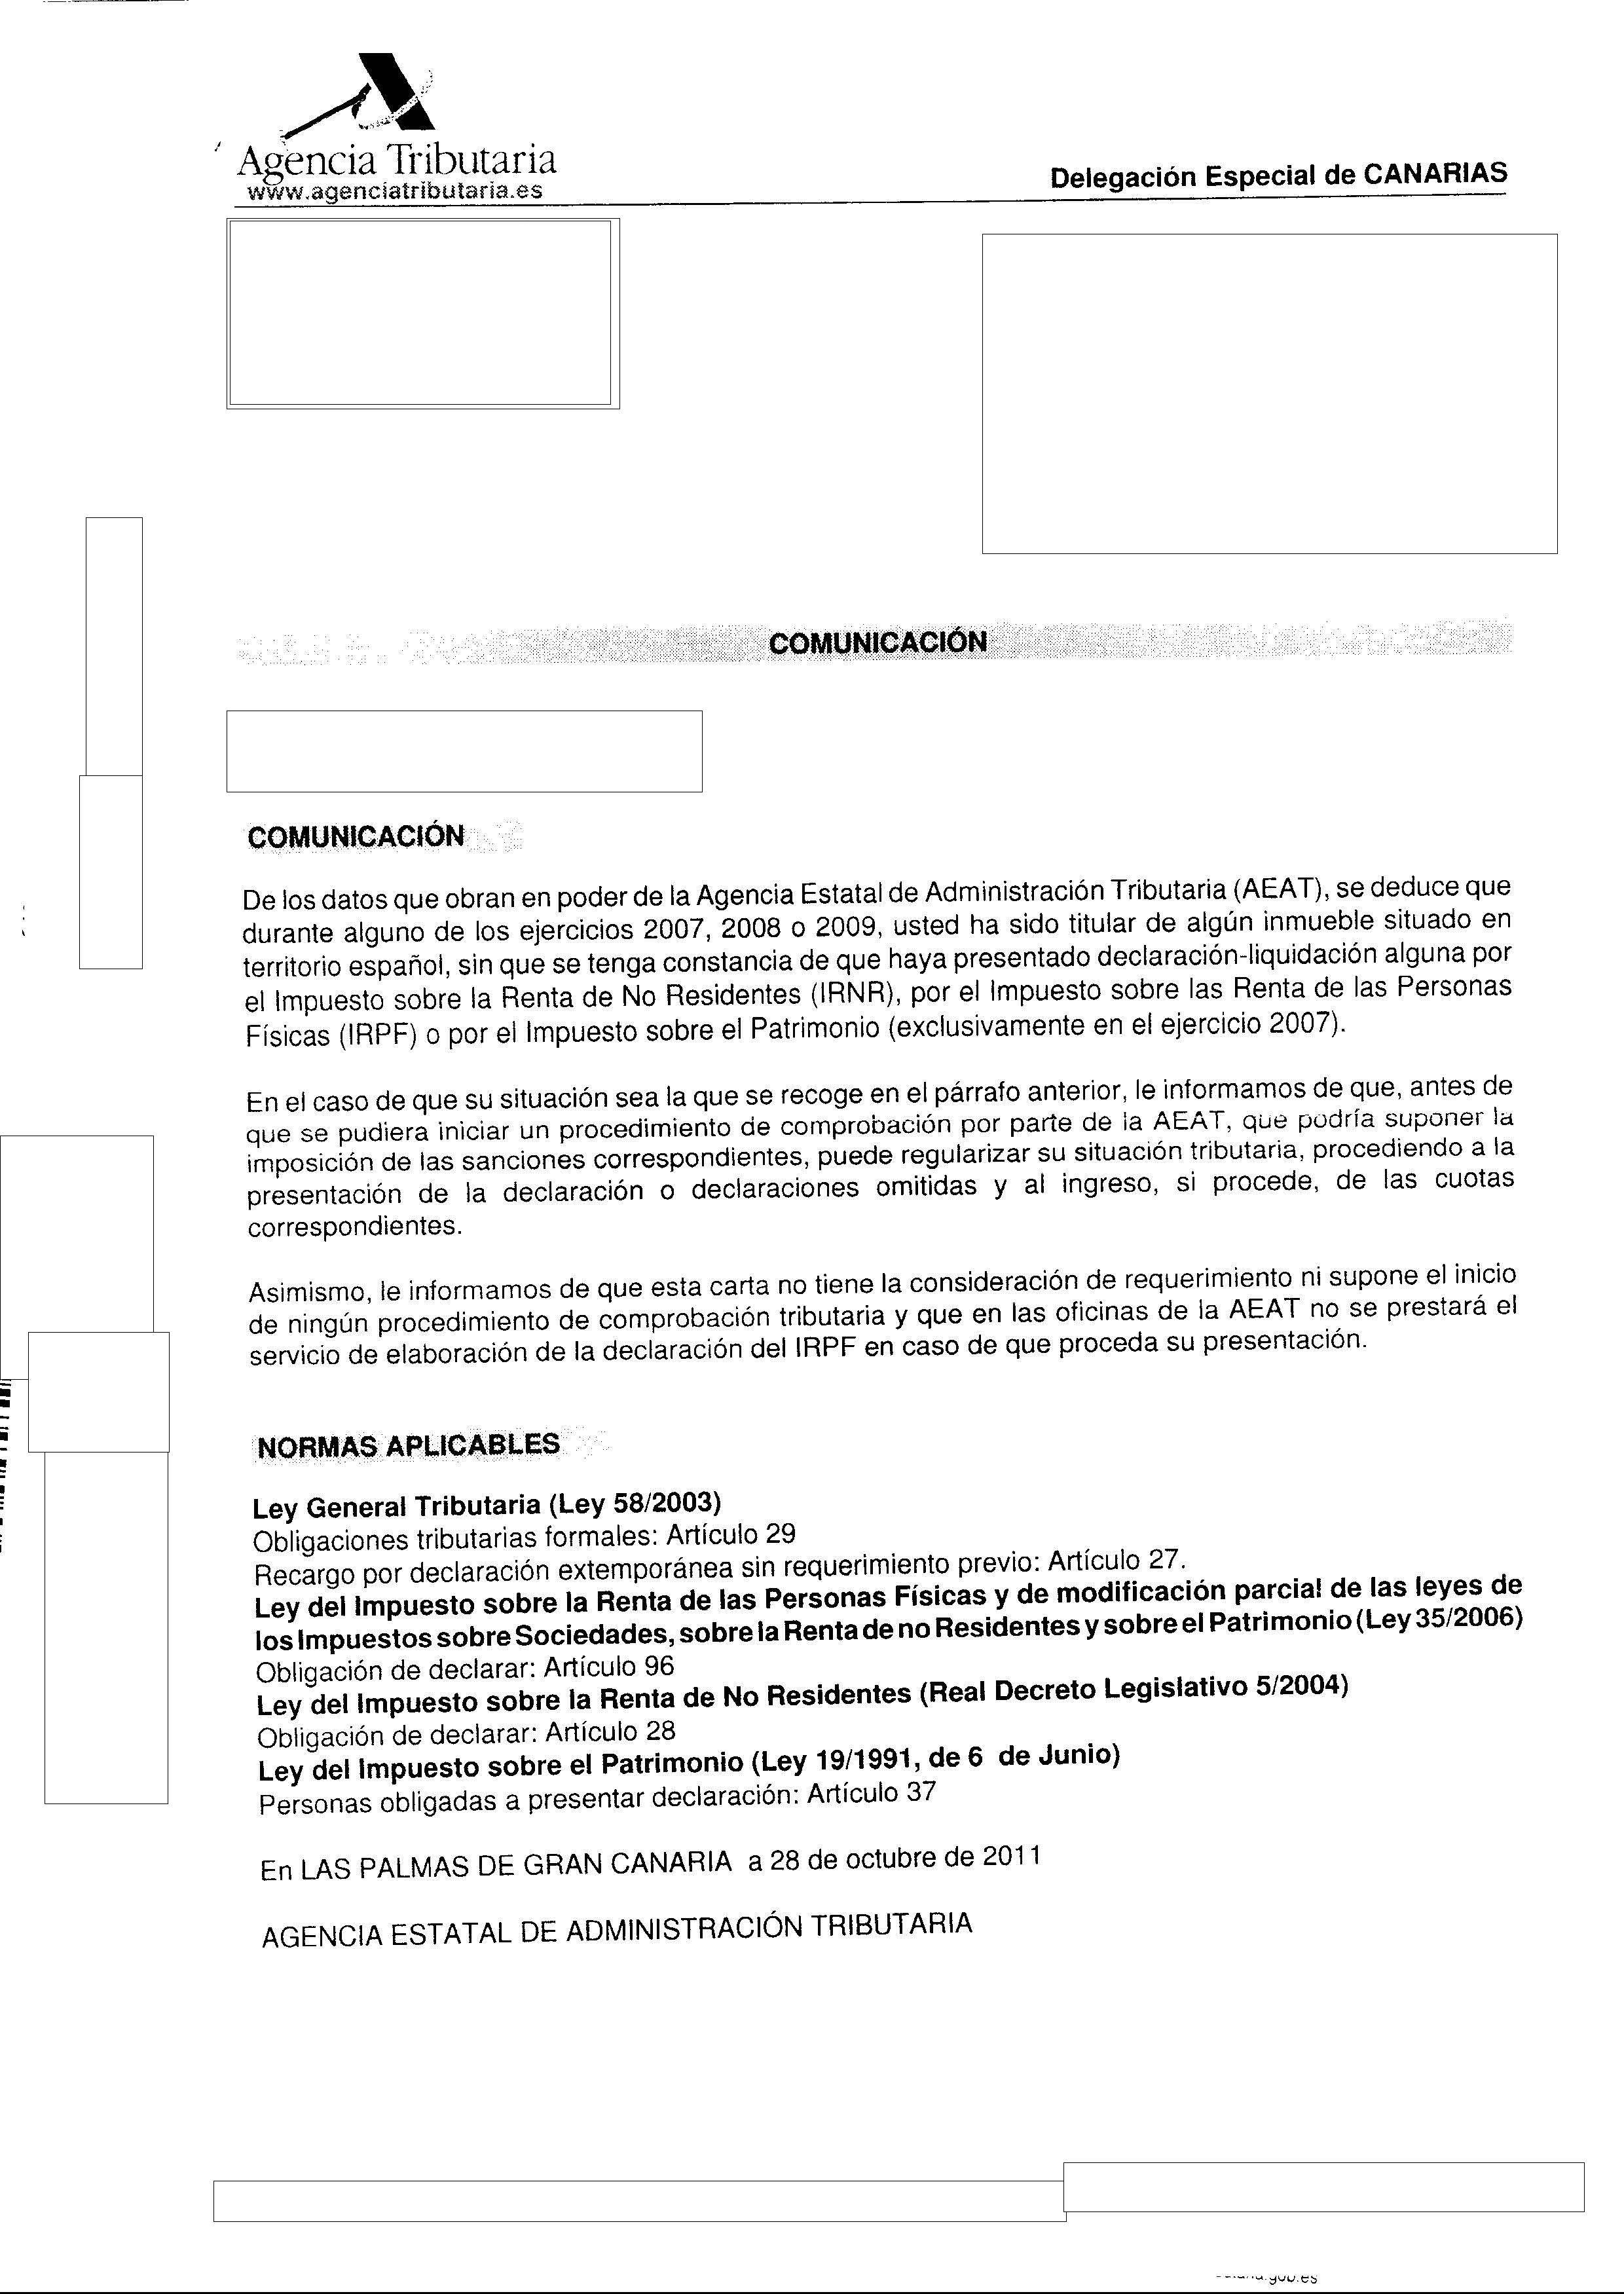 Letter from Spanish Tax Office